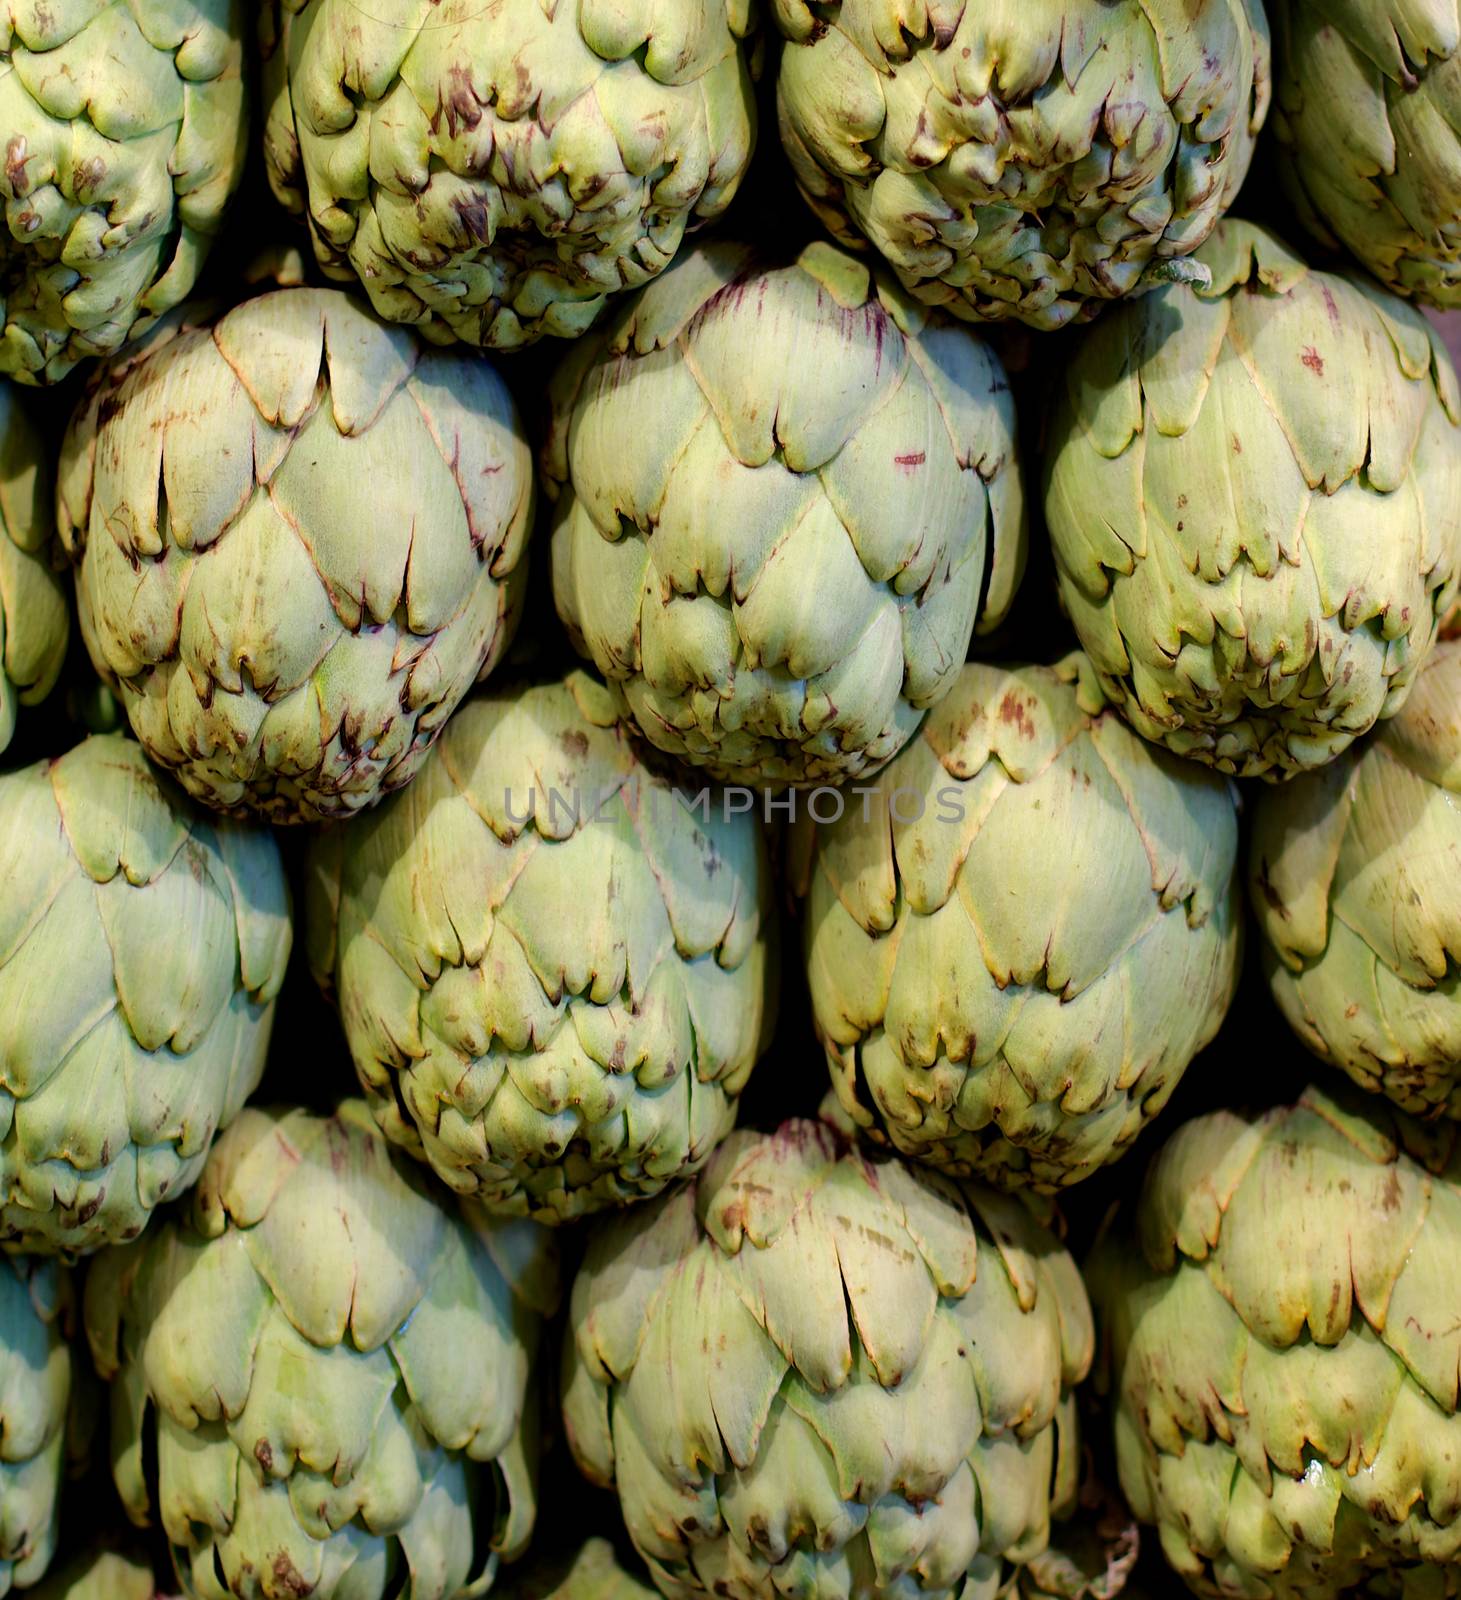 Background of Raw Ripe Artichokes Outdoors on Farmer Market Stand